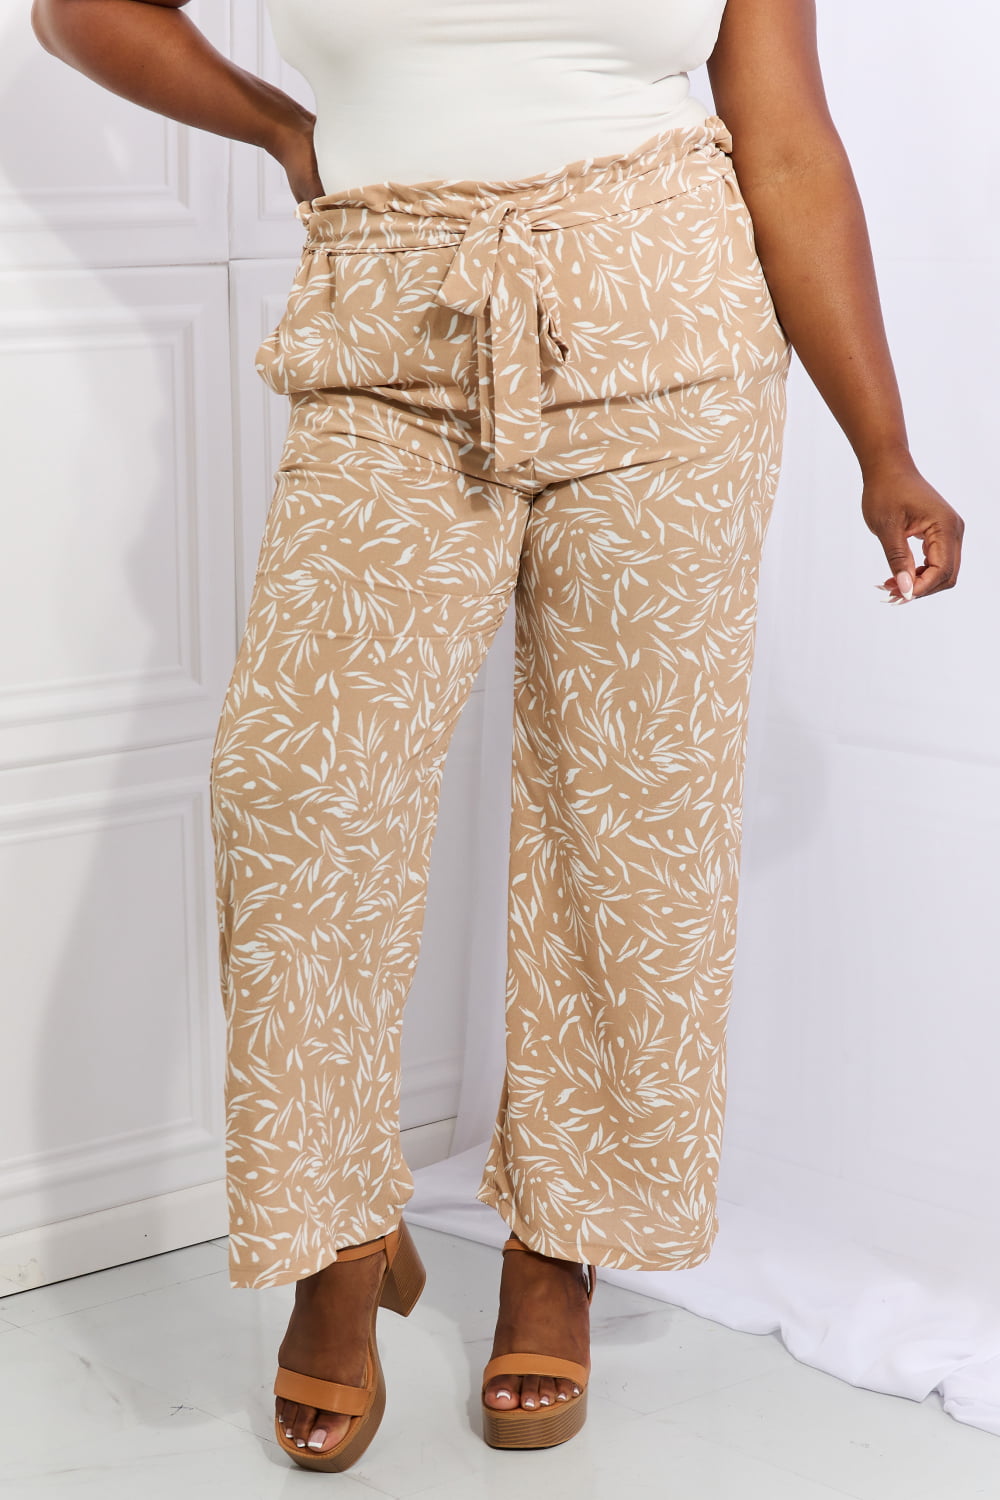 Heimish Right Angle Full Size Geometric Printed Pants in Tan free shipping -Oh Em Gee Boutique